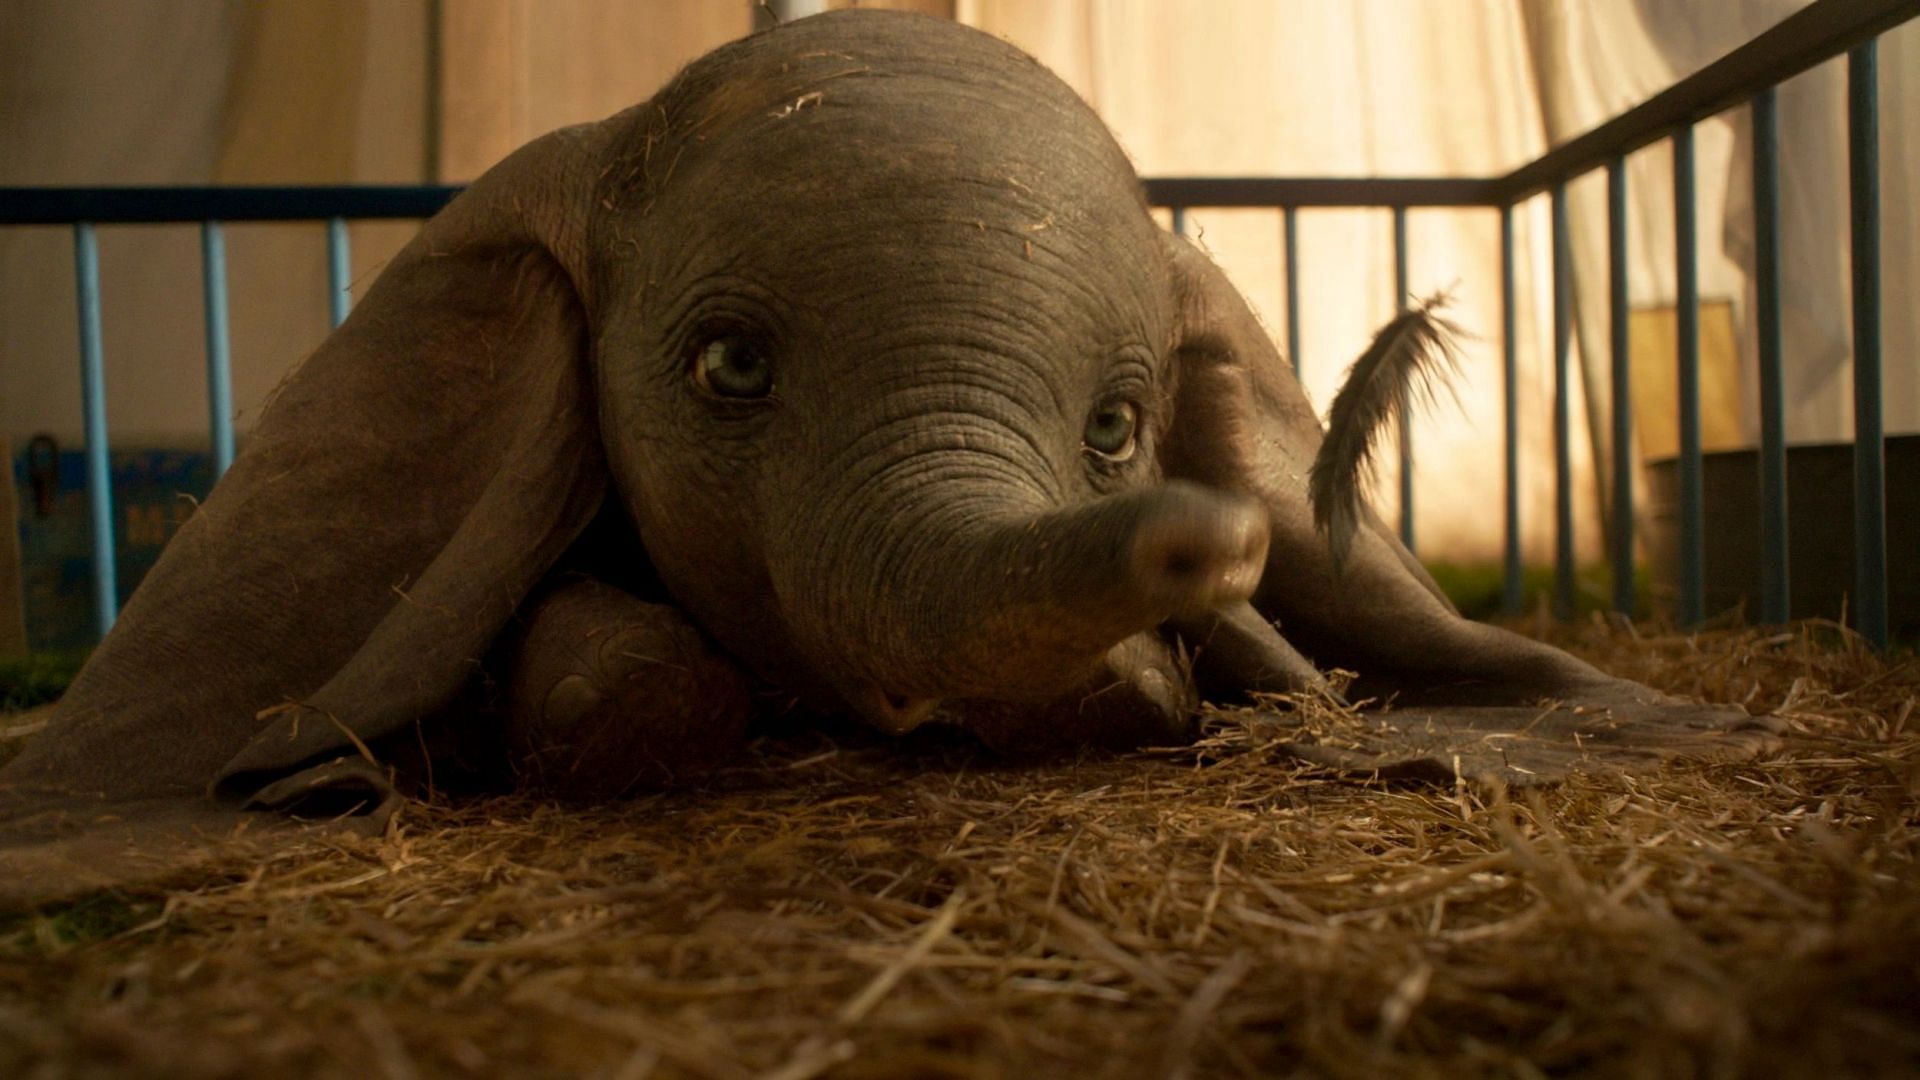 Why the critics were wrong about 'Dumbo' (2019)